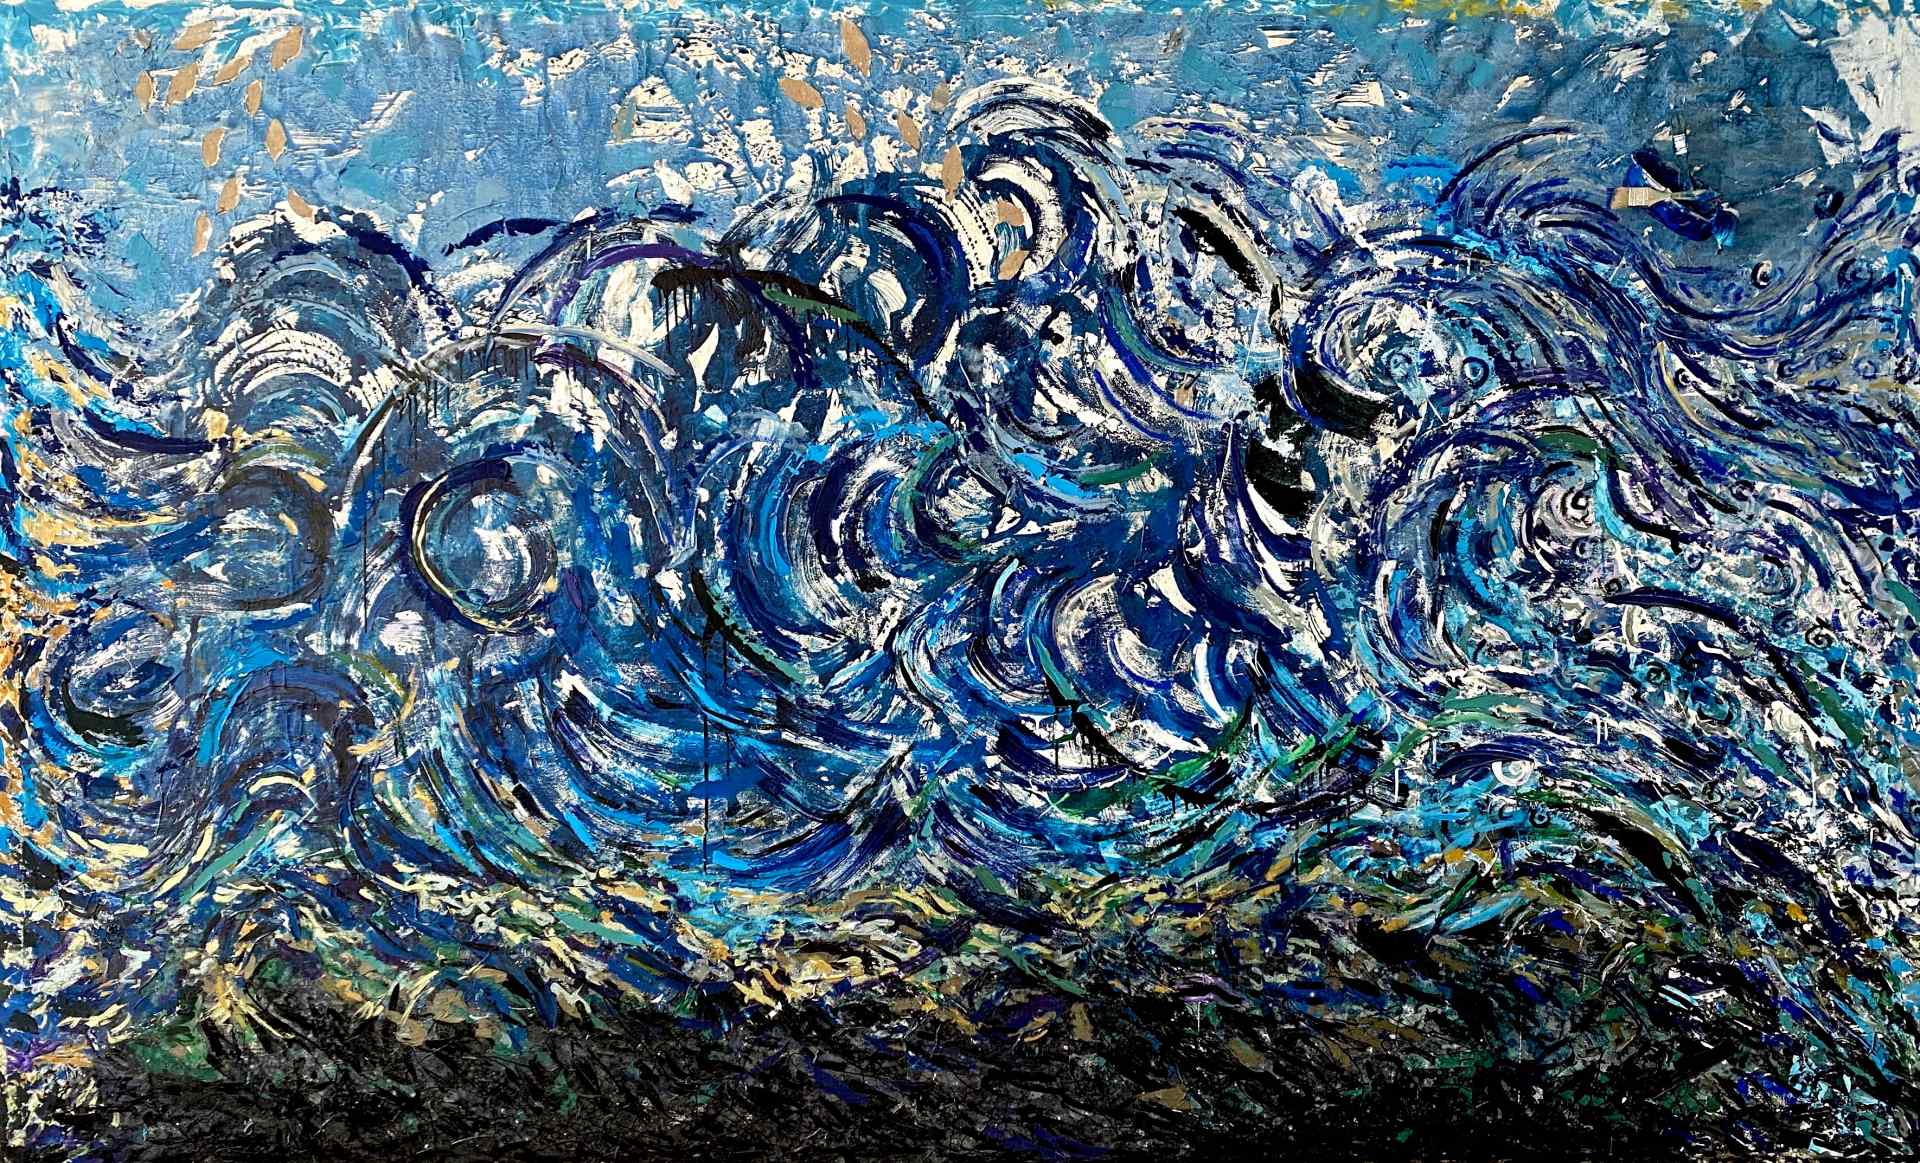 Phenomena | "The Wave" | 2008 | Oils, acrylics, ceramic adhesives with attached bowl and brushes on canvas | 86" X 140"